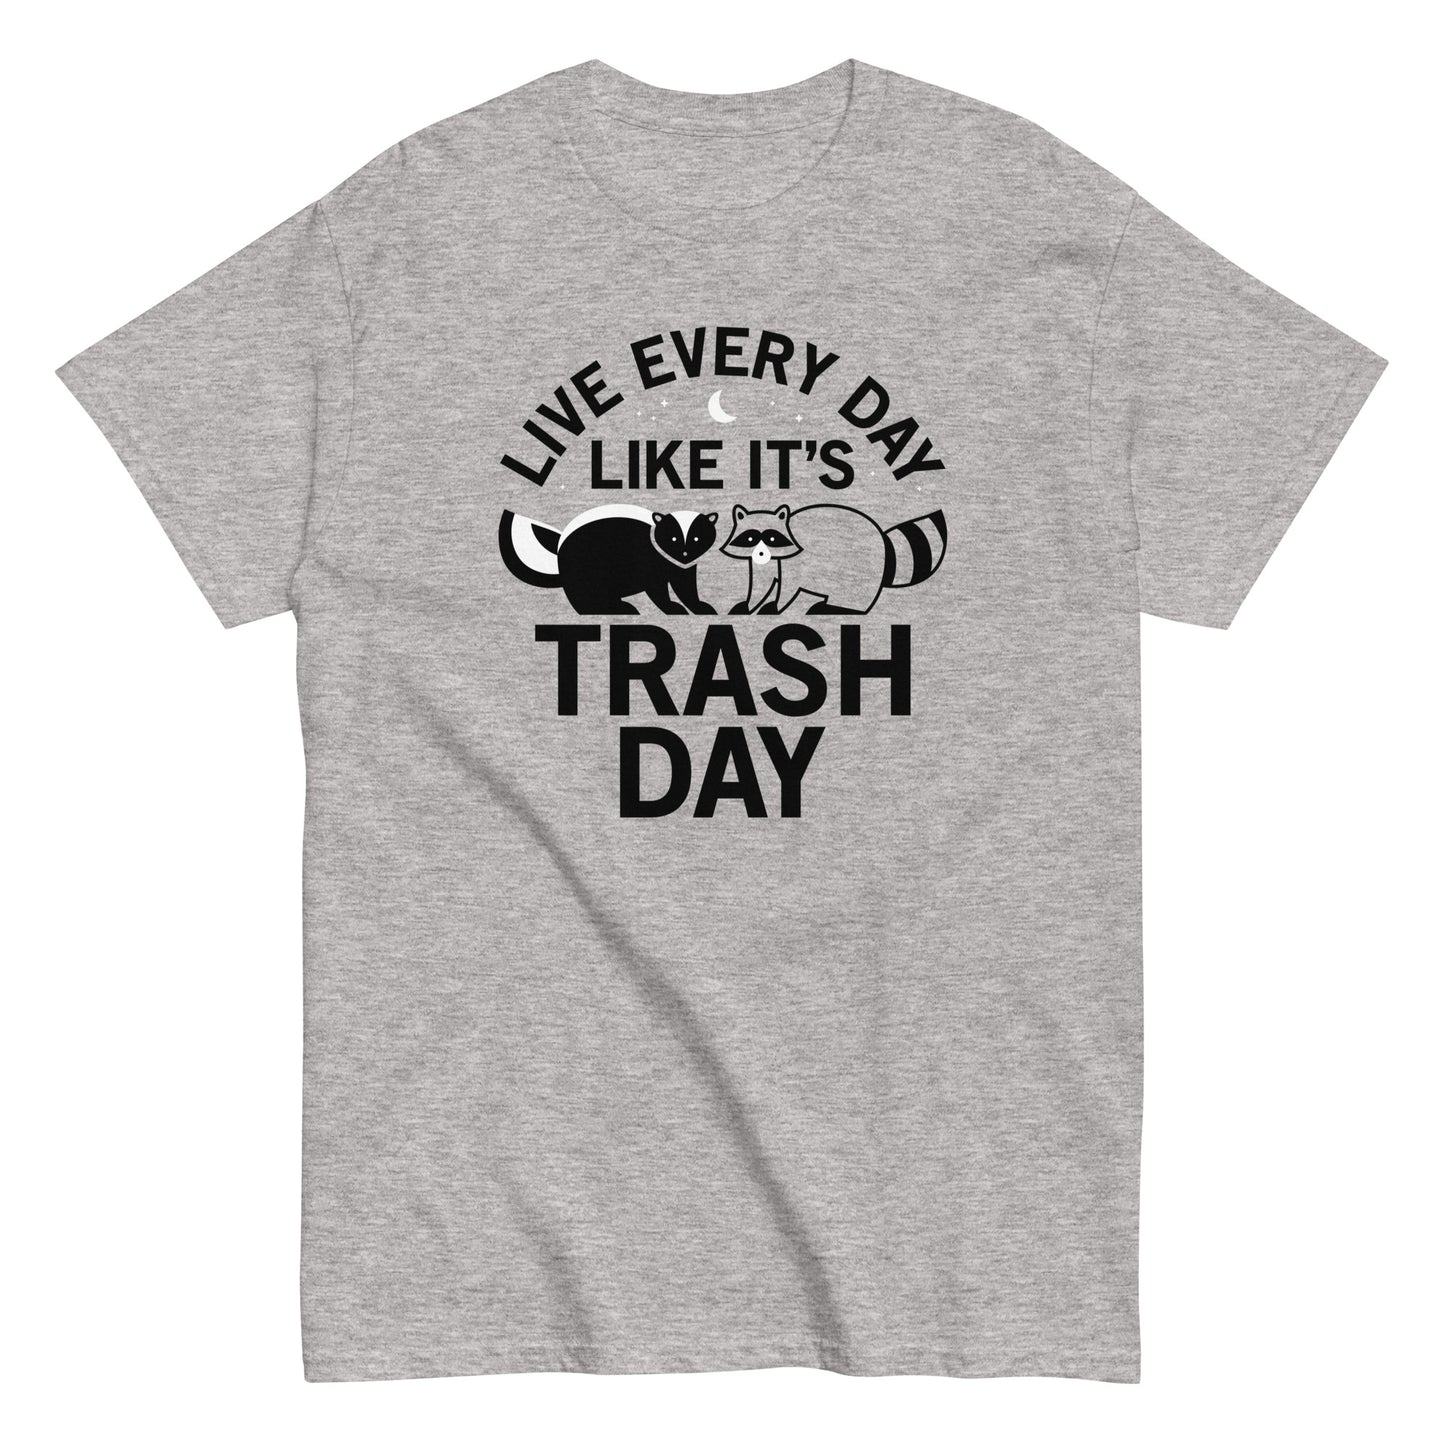 Live Every Day Like It's Trash Day Men's Classic Tee